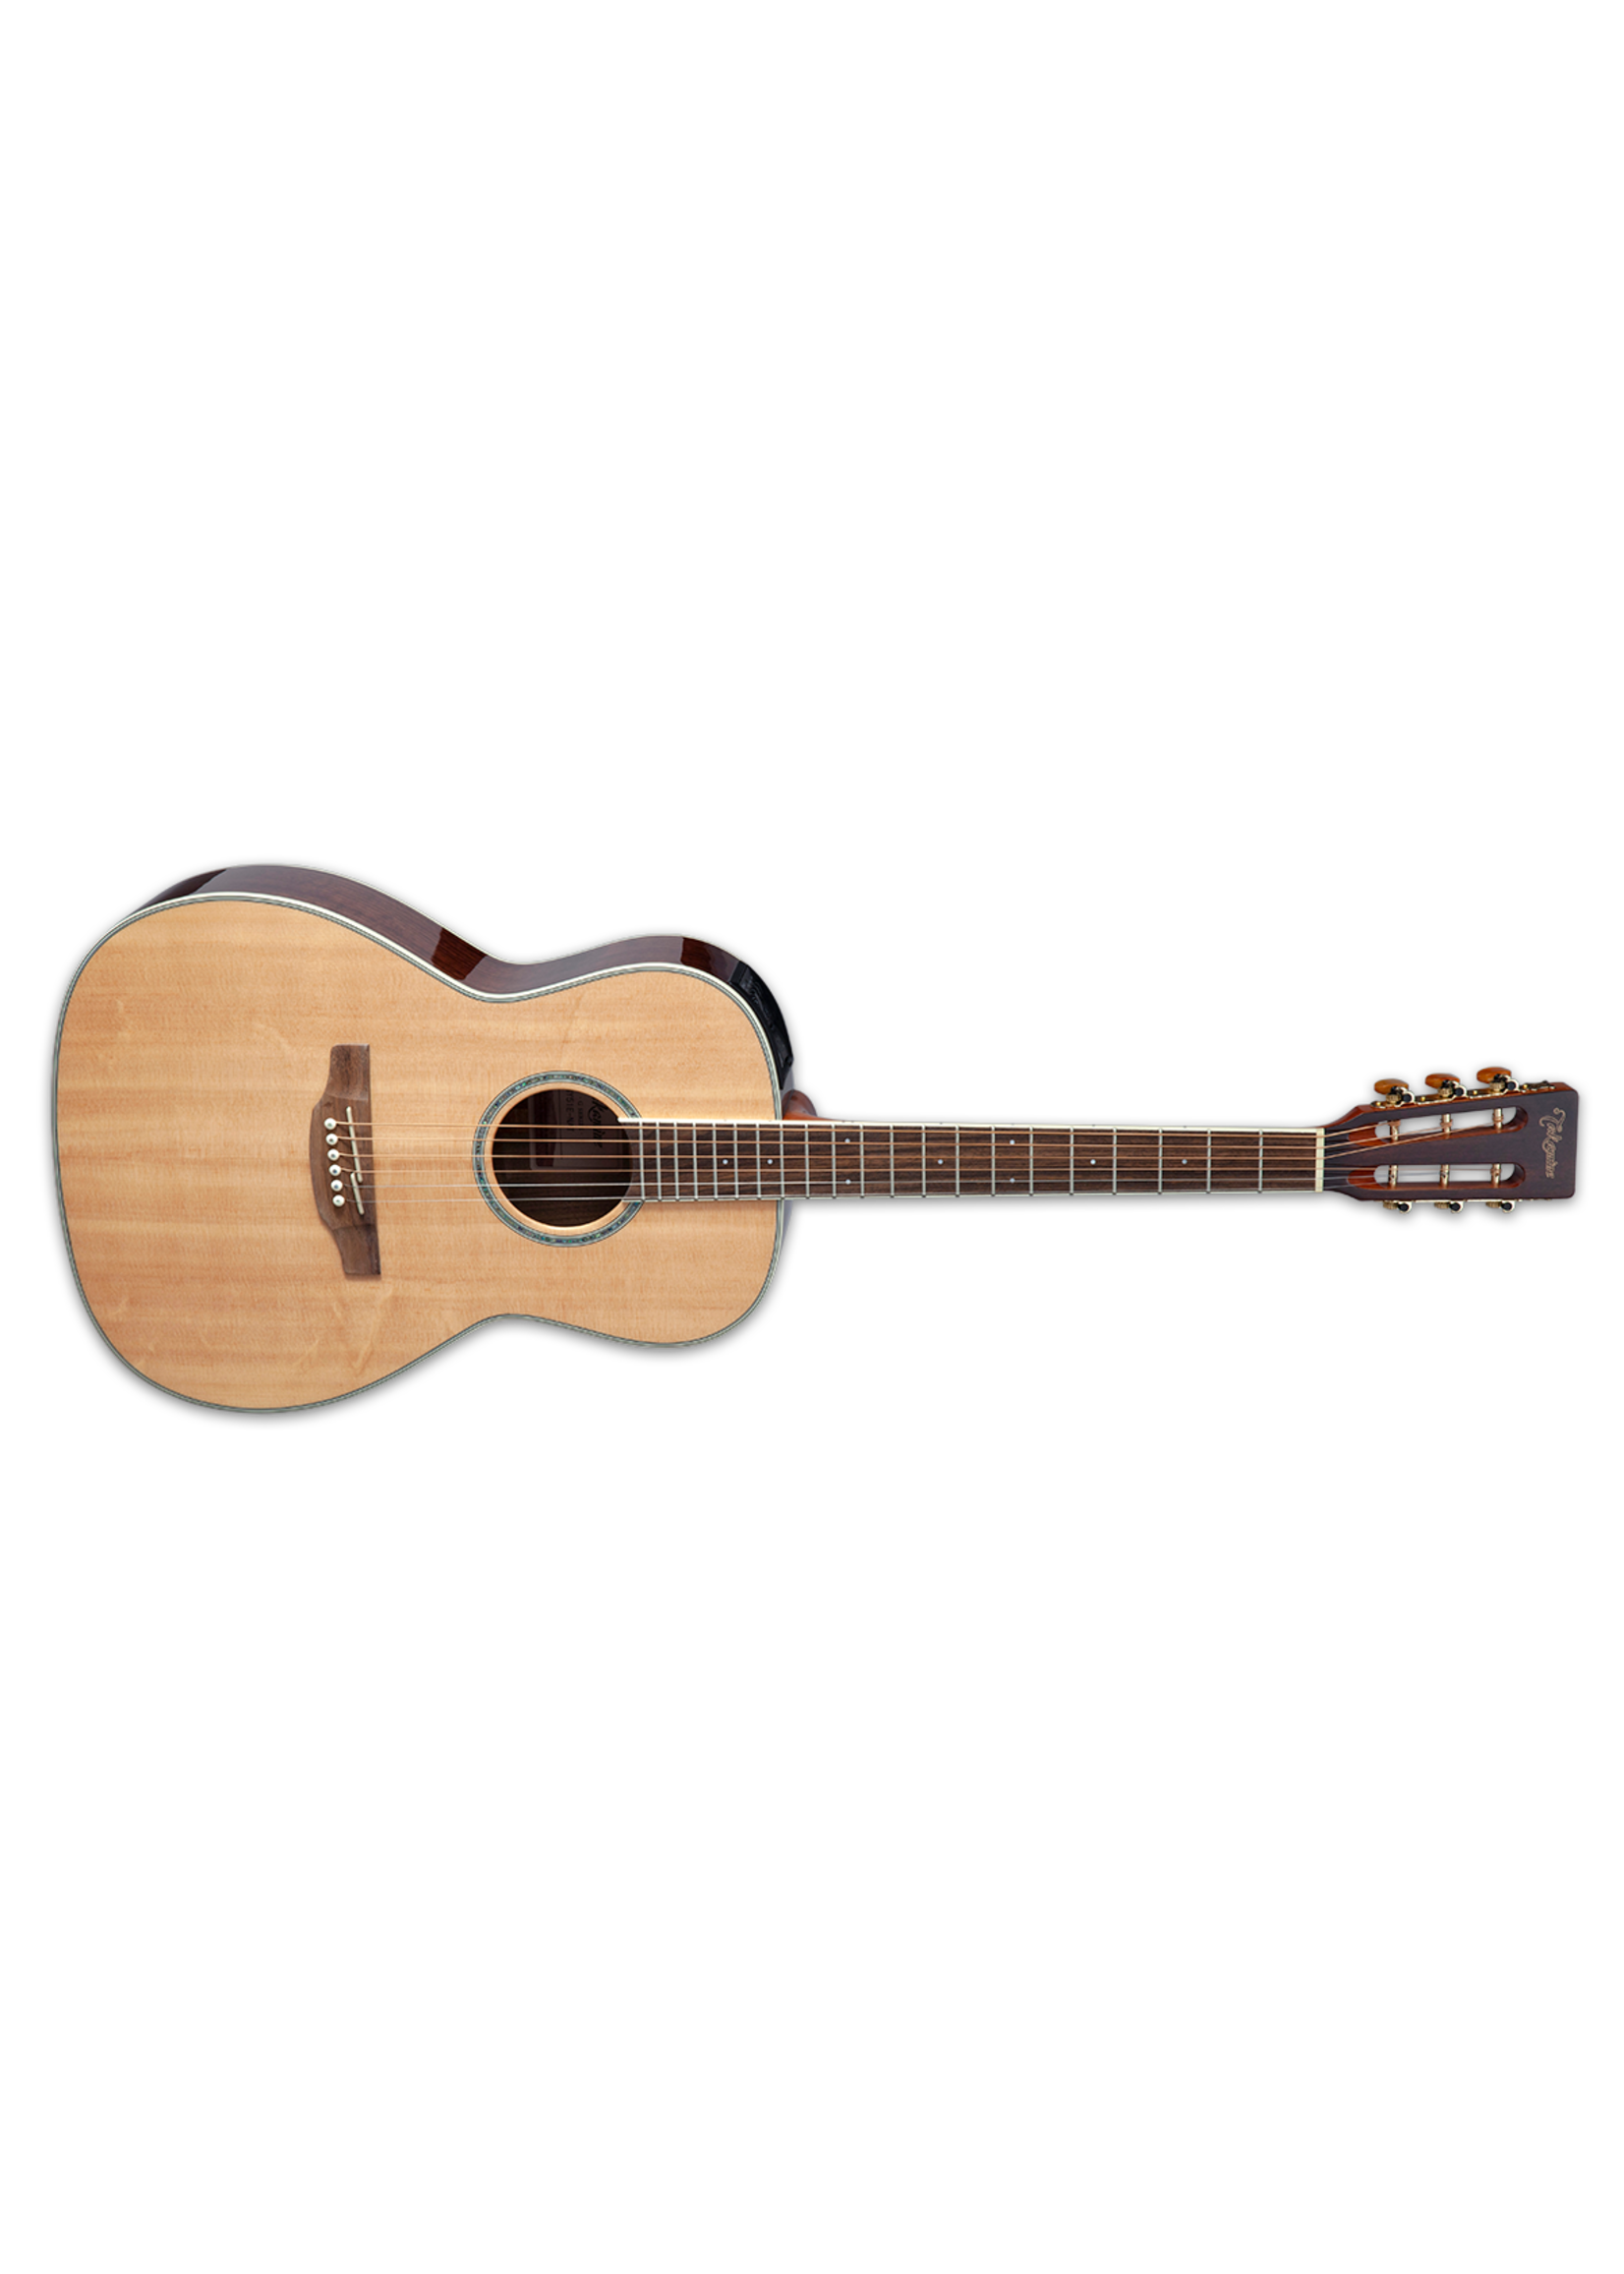 Takamine Takamine GY51E New Yorker Acoustic-Electric Guitar, Natural